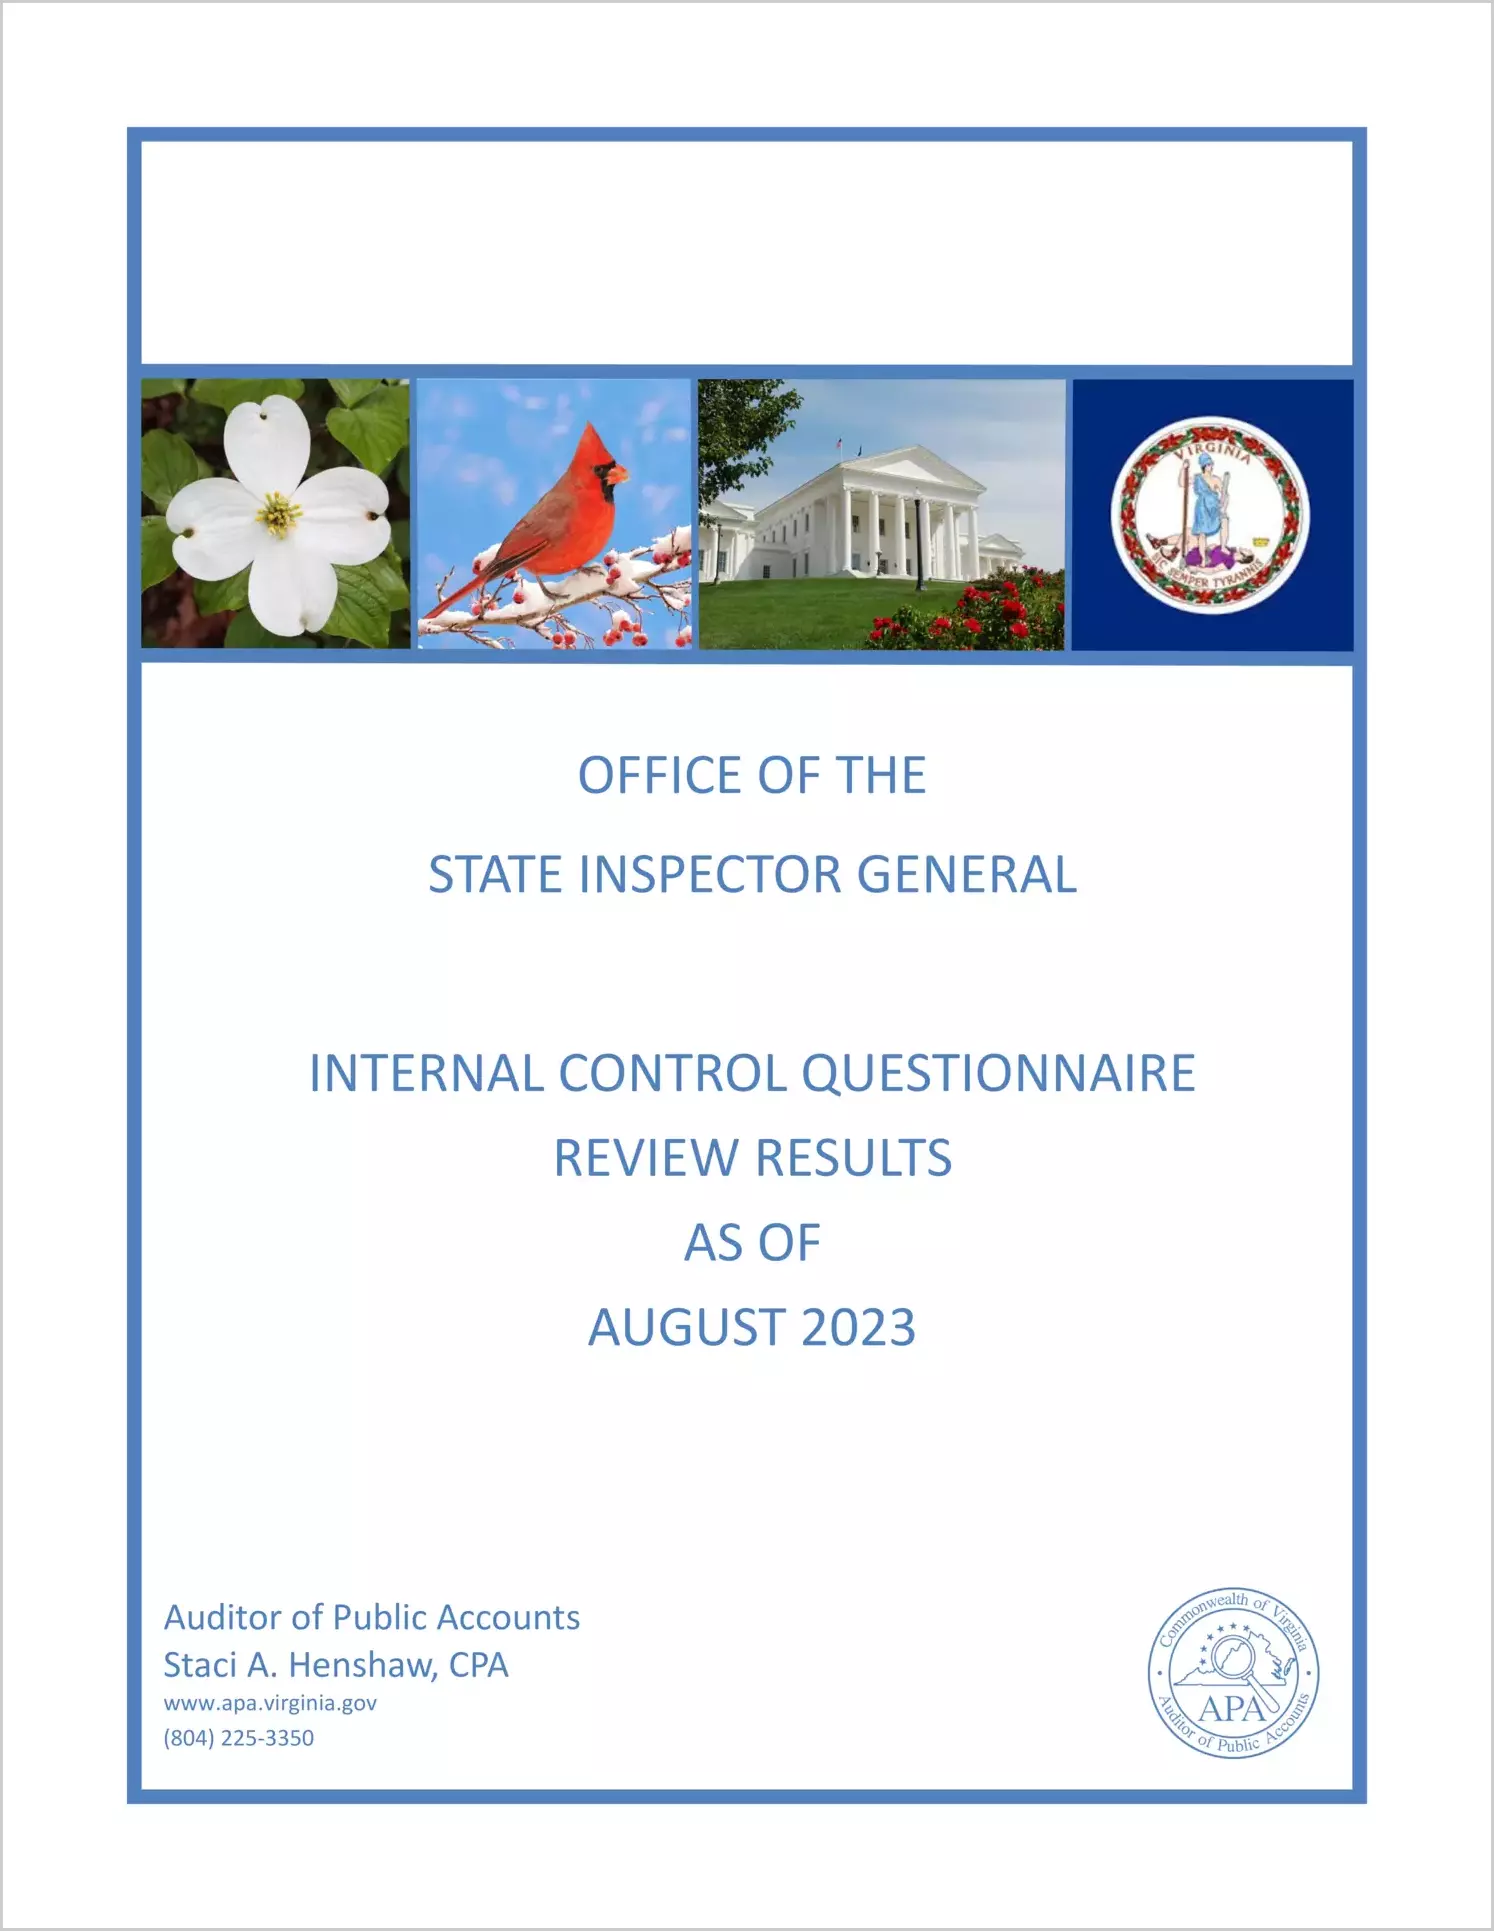 Office of the State Inspector General Internal Control Questionnaire Review Results as of August 2023